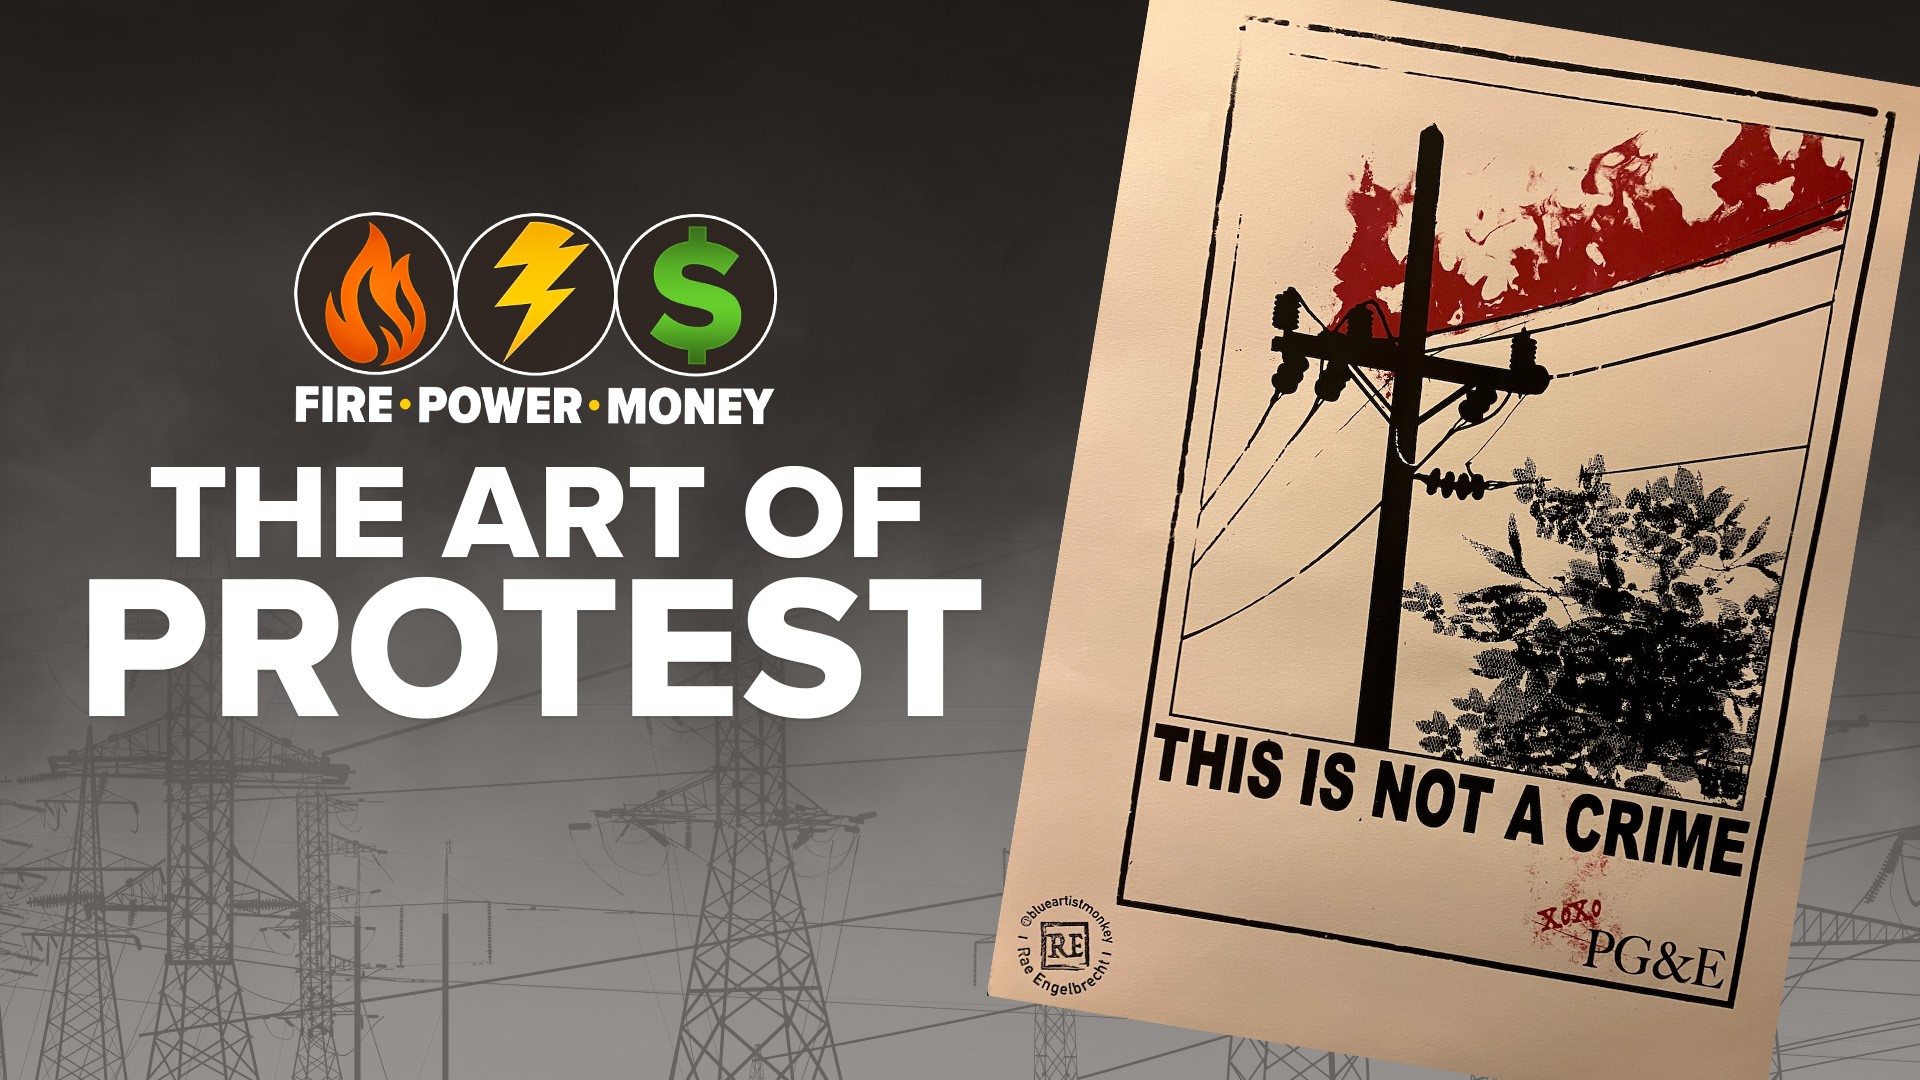 A student vents her anger over PG&E's connection to deadly wildfires by creating protest art.